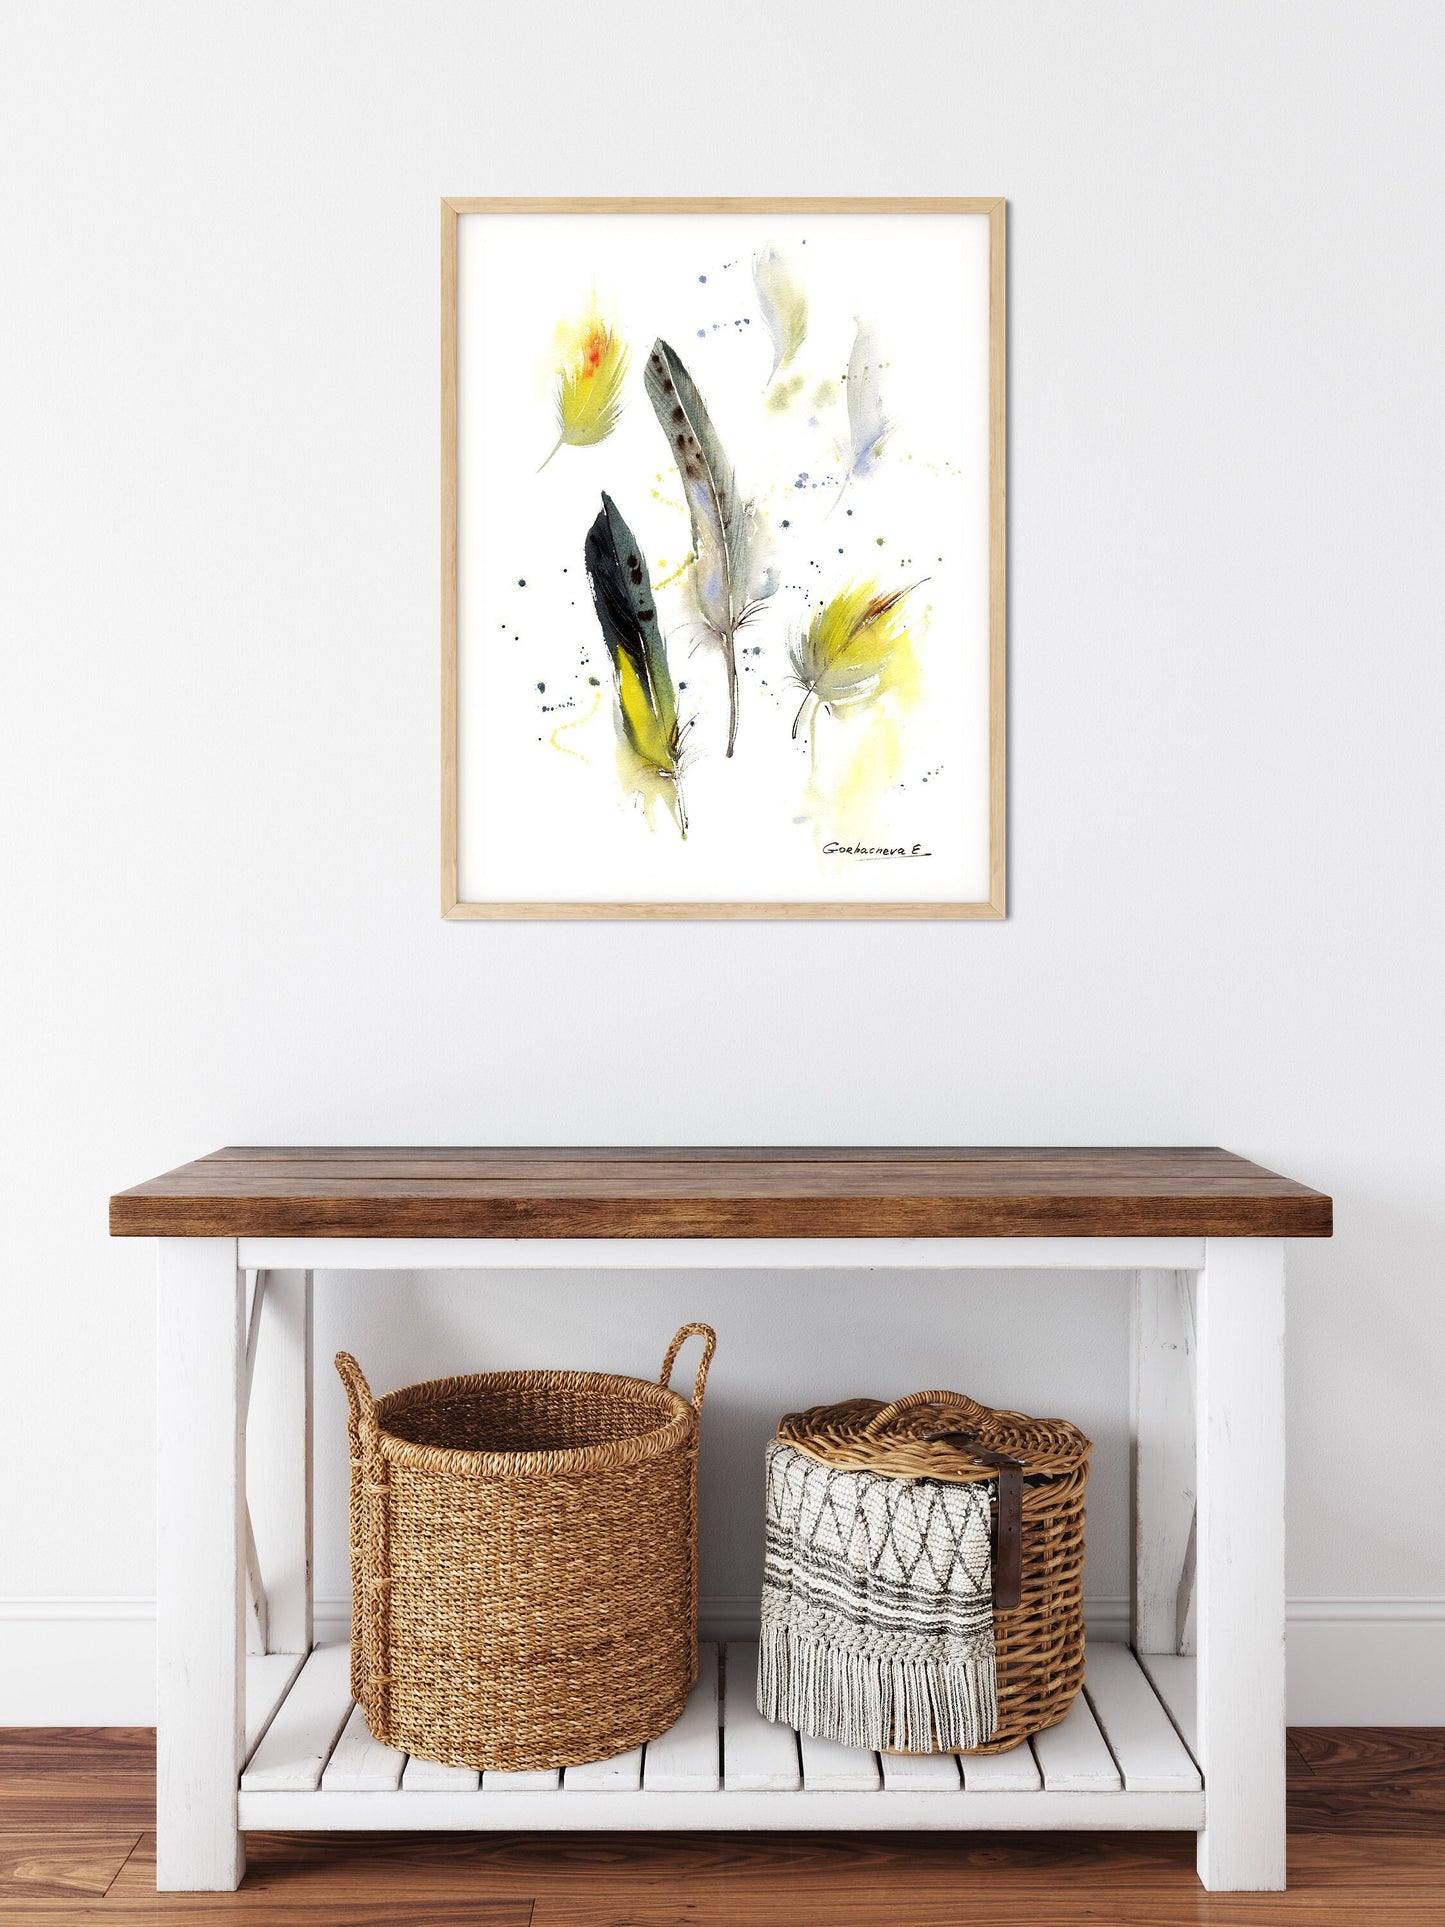 Yellow Gray Feather Art Print, Birds Flying of a Feather Art, Home Wall Decor, Minimalist Parrot Birds, Giclee Canvas